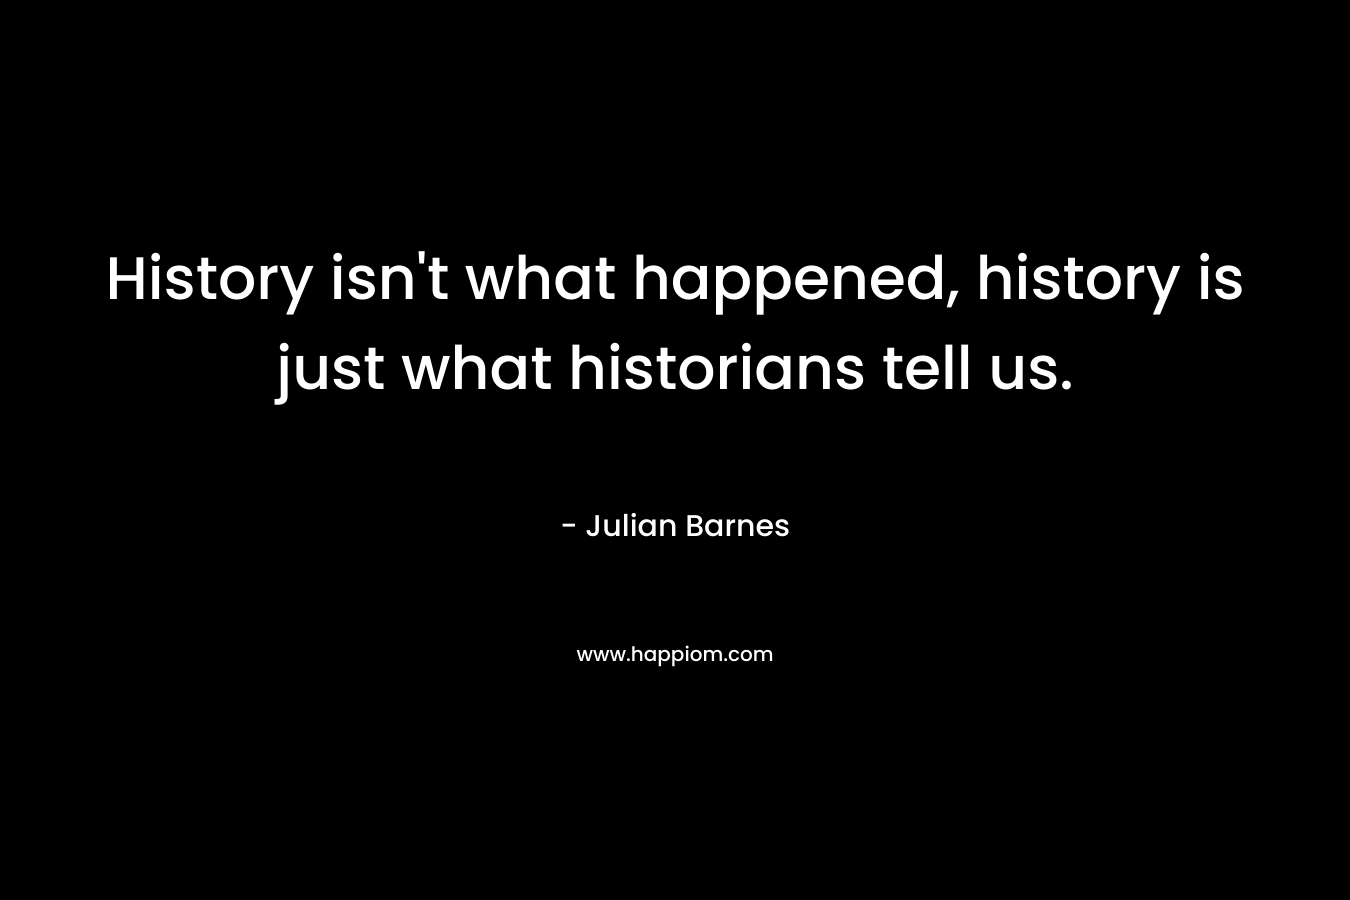 History isn't what happened, history is just what historians tell us.